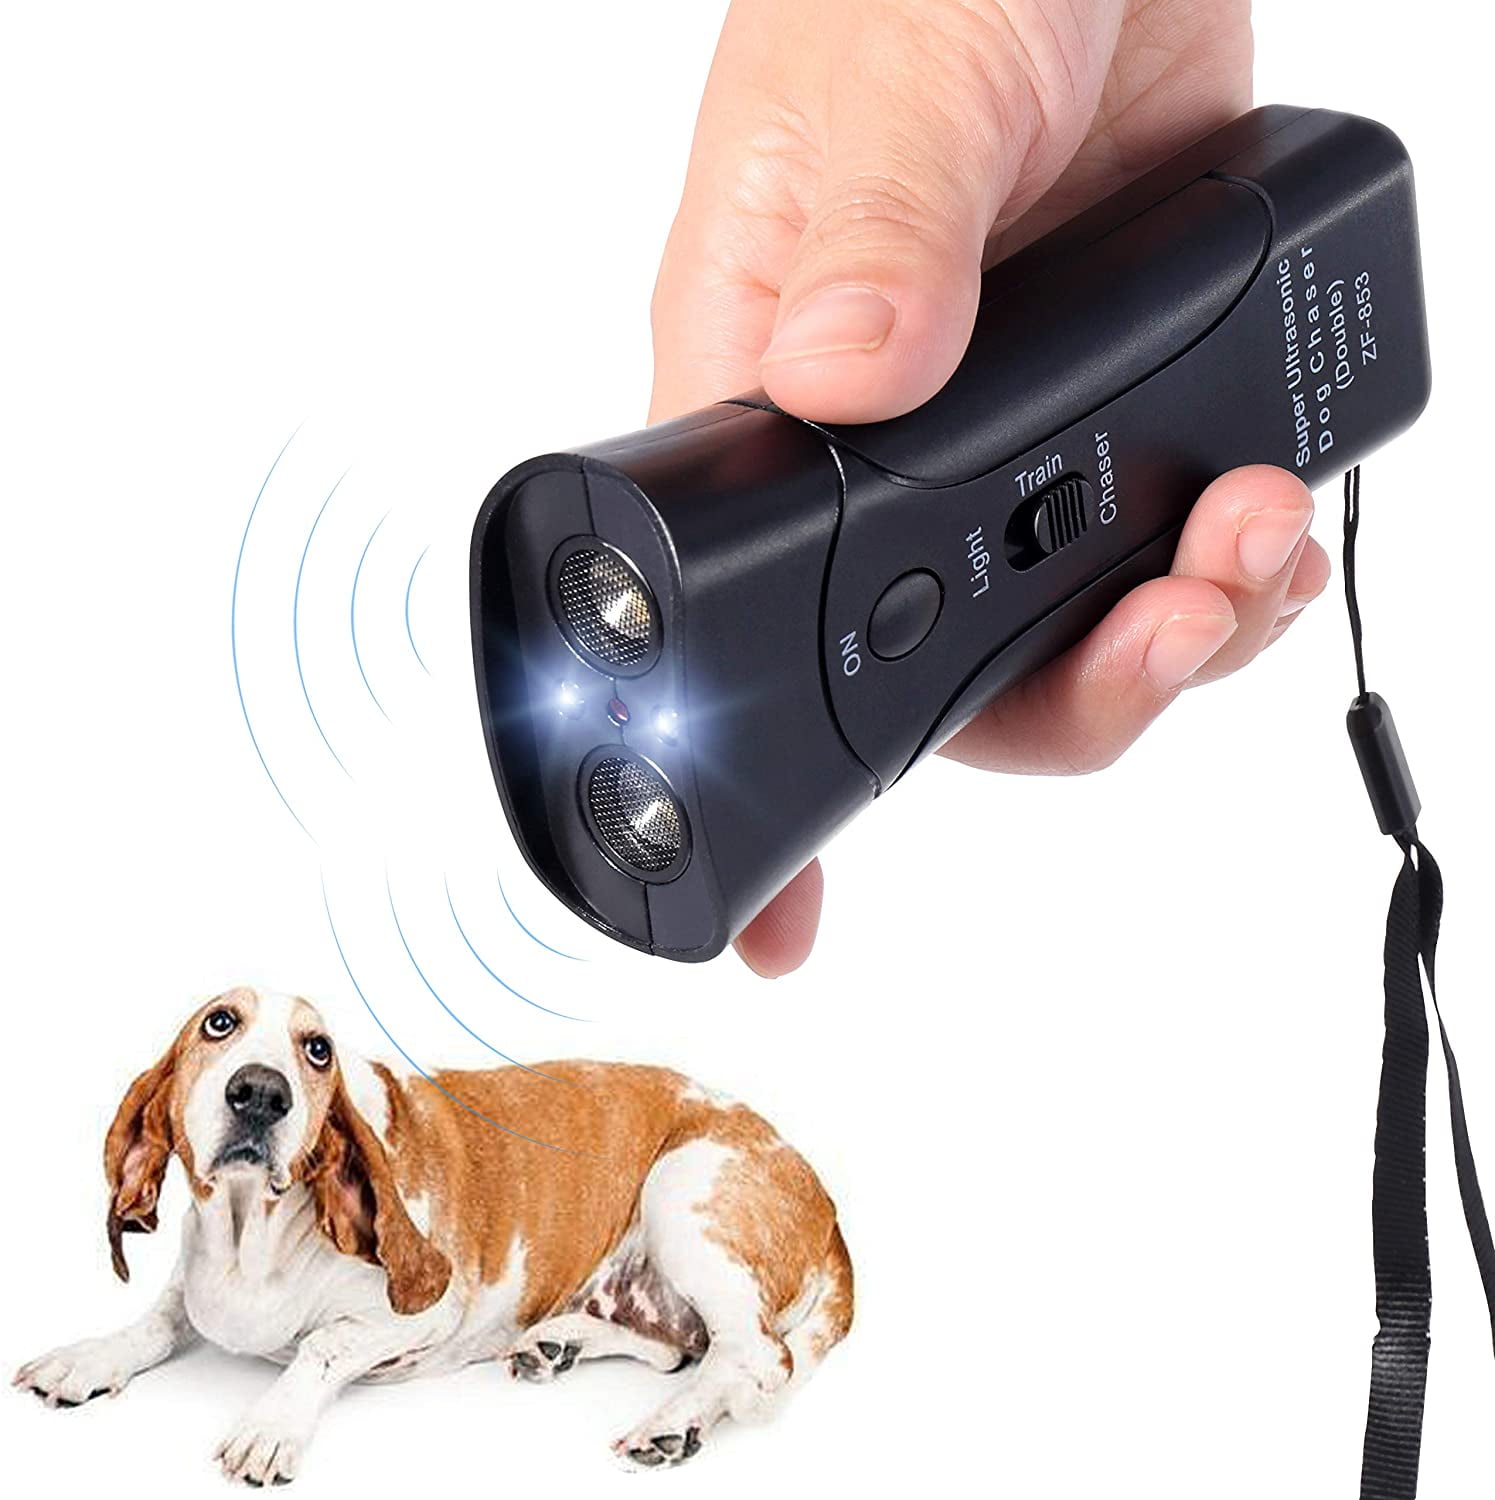 REMOTE CONTROL PEST REPELLER AUTOMATIC BARK STOP TRAINER BARK STOPPER 